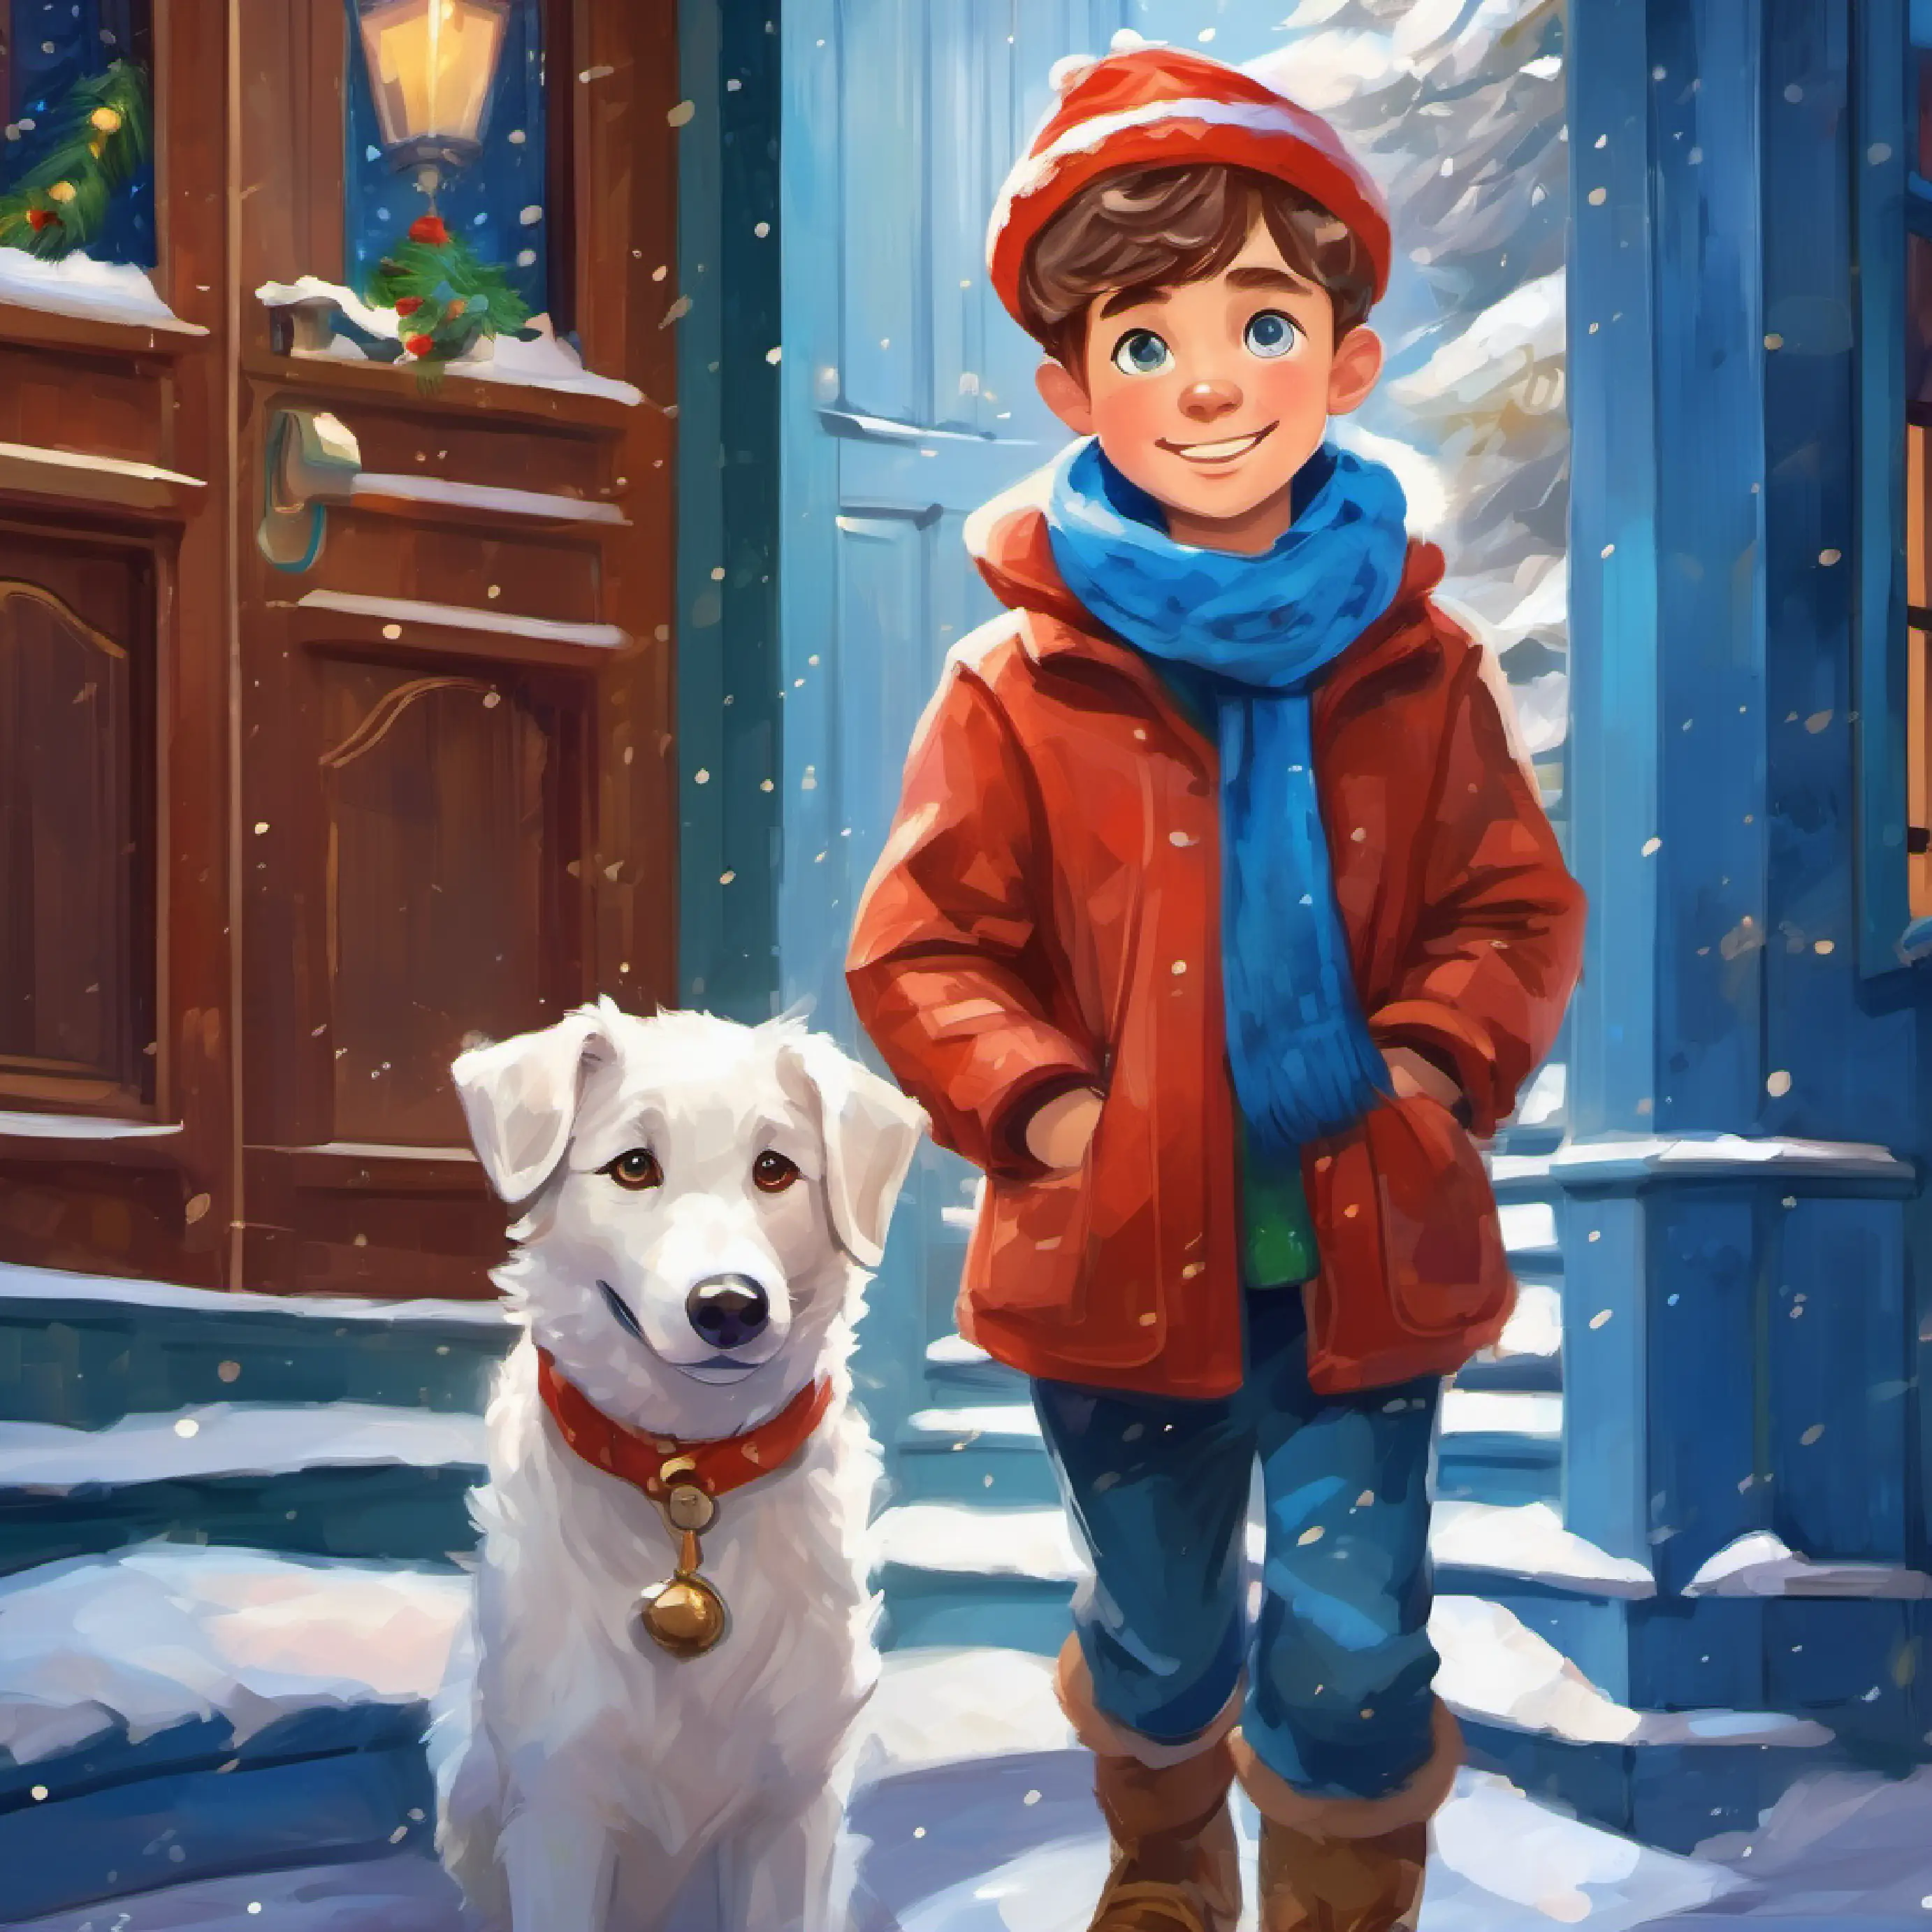 Young boy with bright blue eyes, spirited and imaginative returns home eager to talk with Loyal dog with the secret ability to talk, cheerful and playful